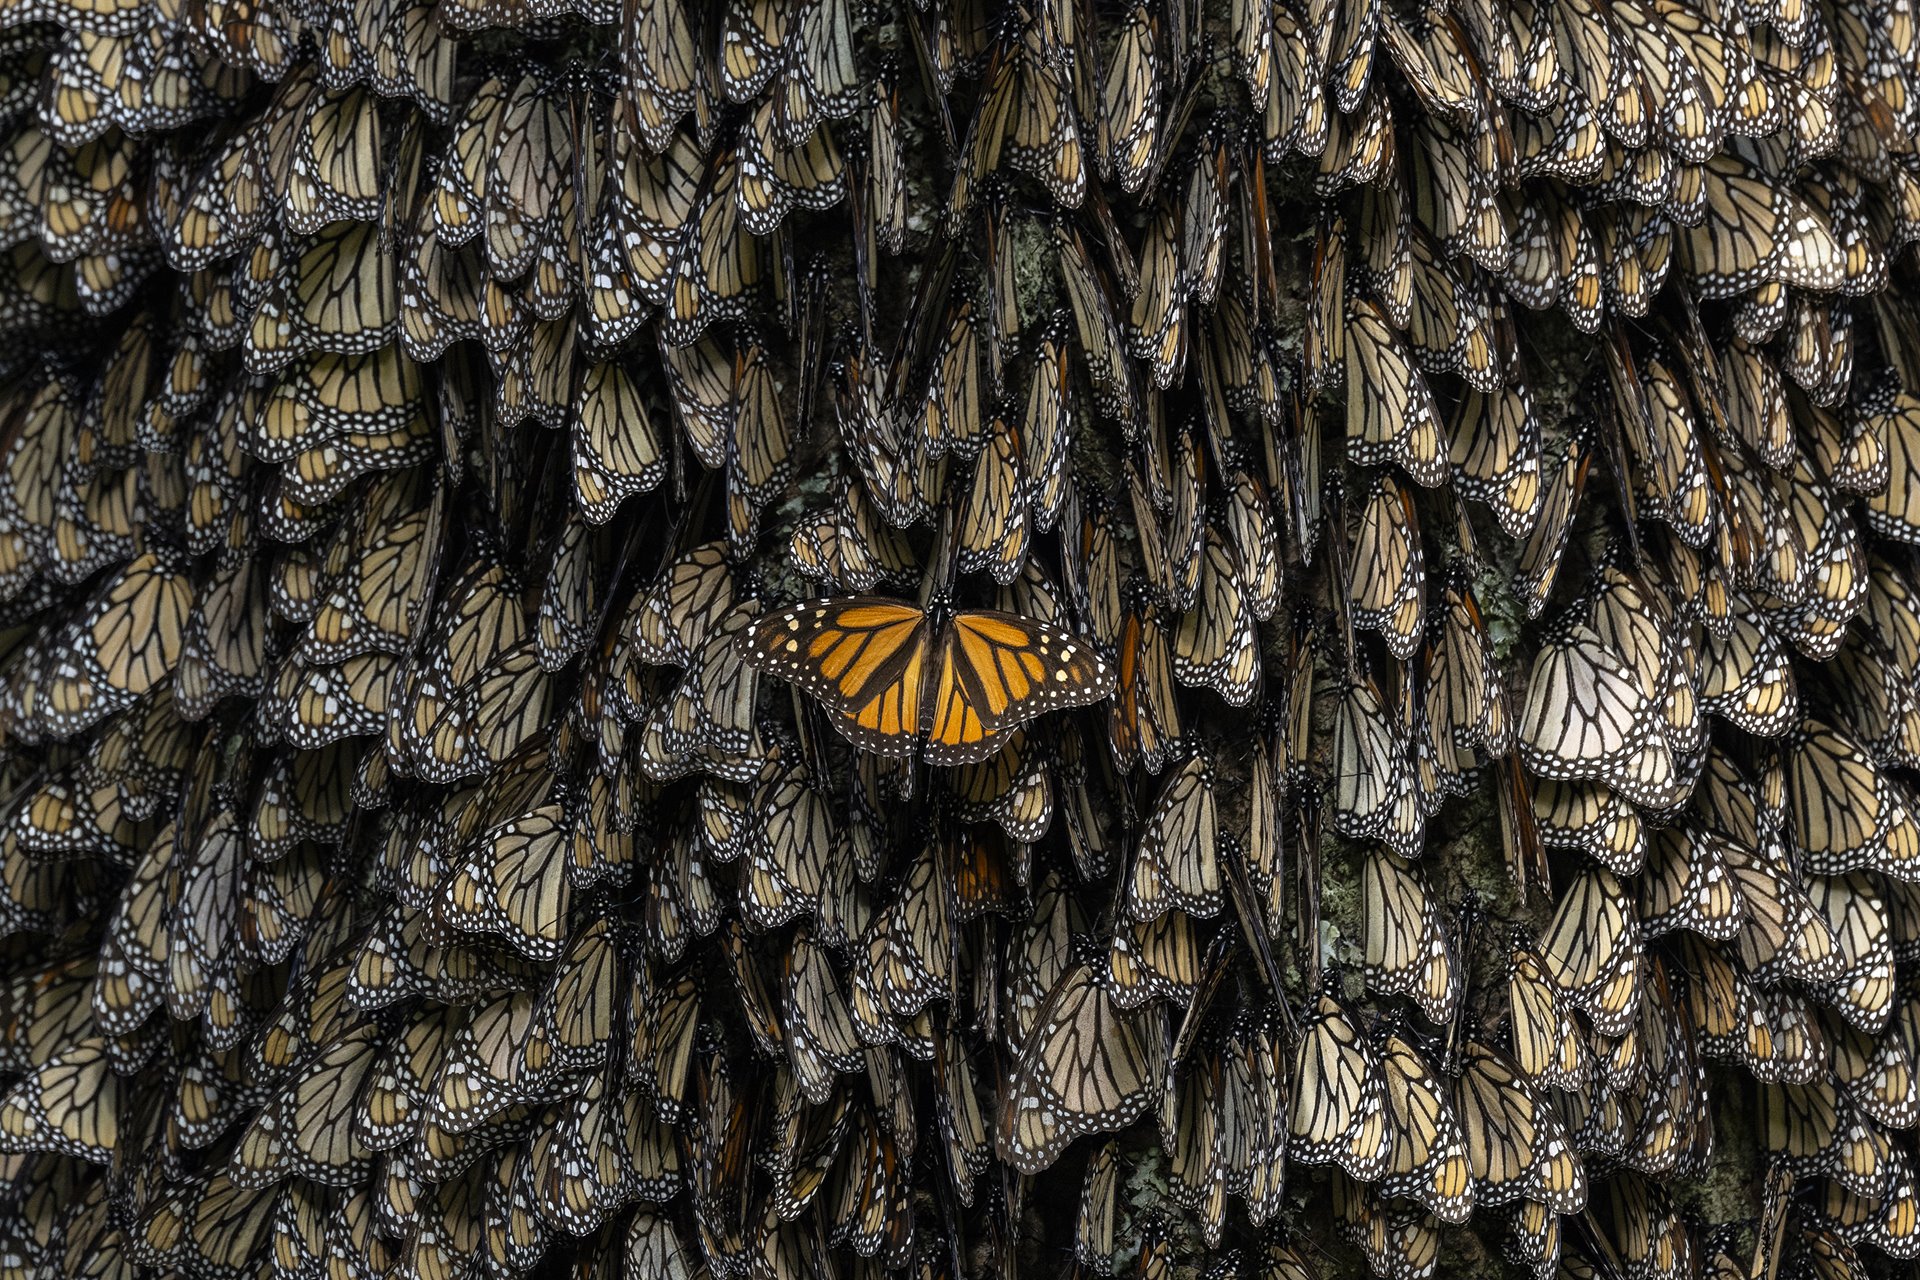 A latecomer attempts to squeeze in between other monarch butterflies for warmth, at El Rosario Monarch Butterfly Sanctuary, a migratory overwintering spot within the Monarch Butterfly Biosphere Reserve in Michoacán, Mexico. Most of the eastern population of monarch butterflies overwinter in the reserve.